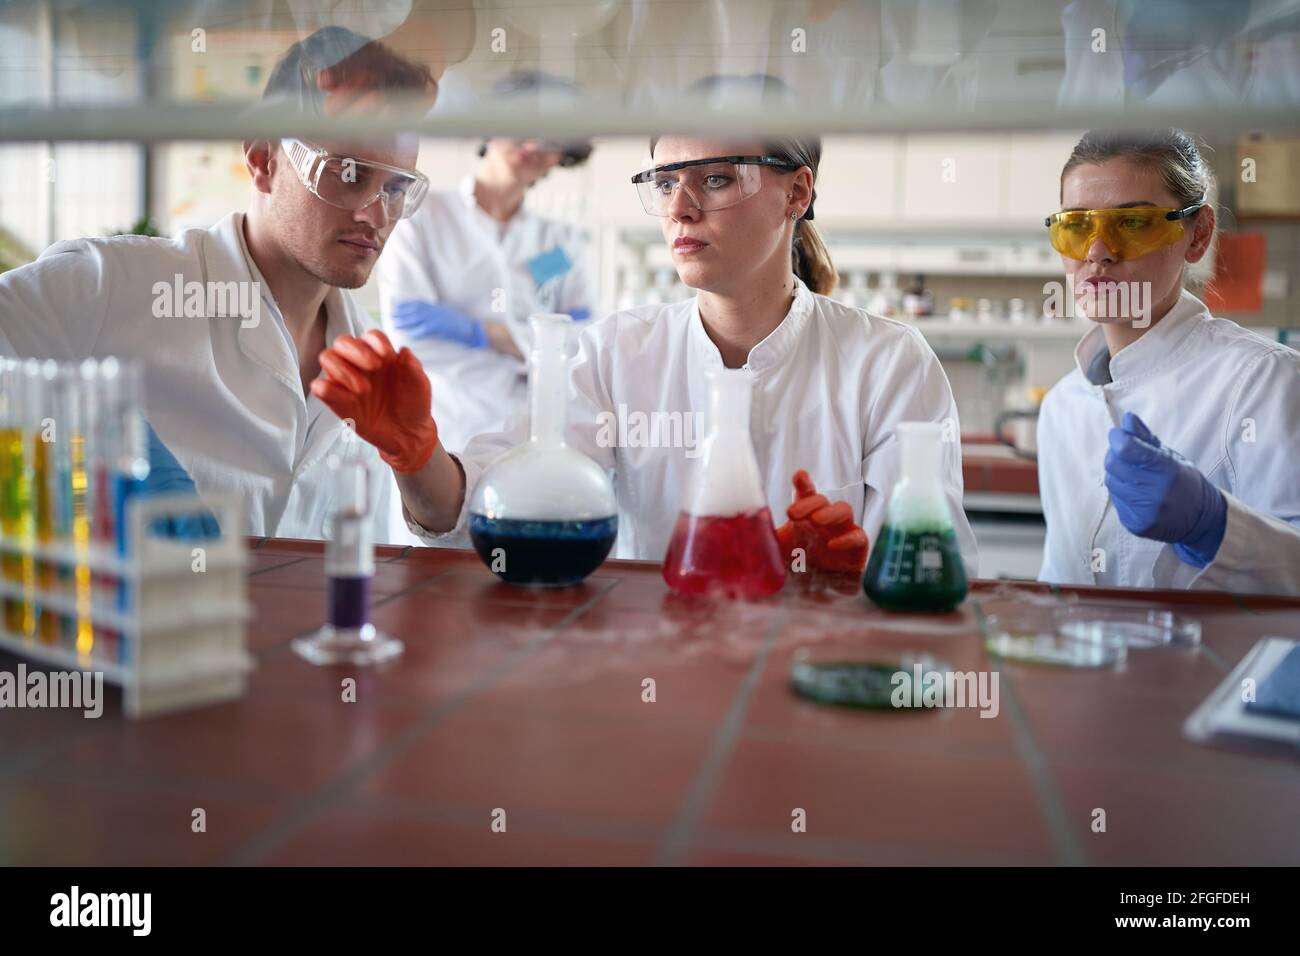 Young chemistry students work with dangerous chemicals in a working atmosphere in the university laboratory. Science, chemistry, lab, people Stock Photo